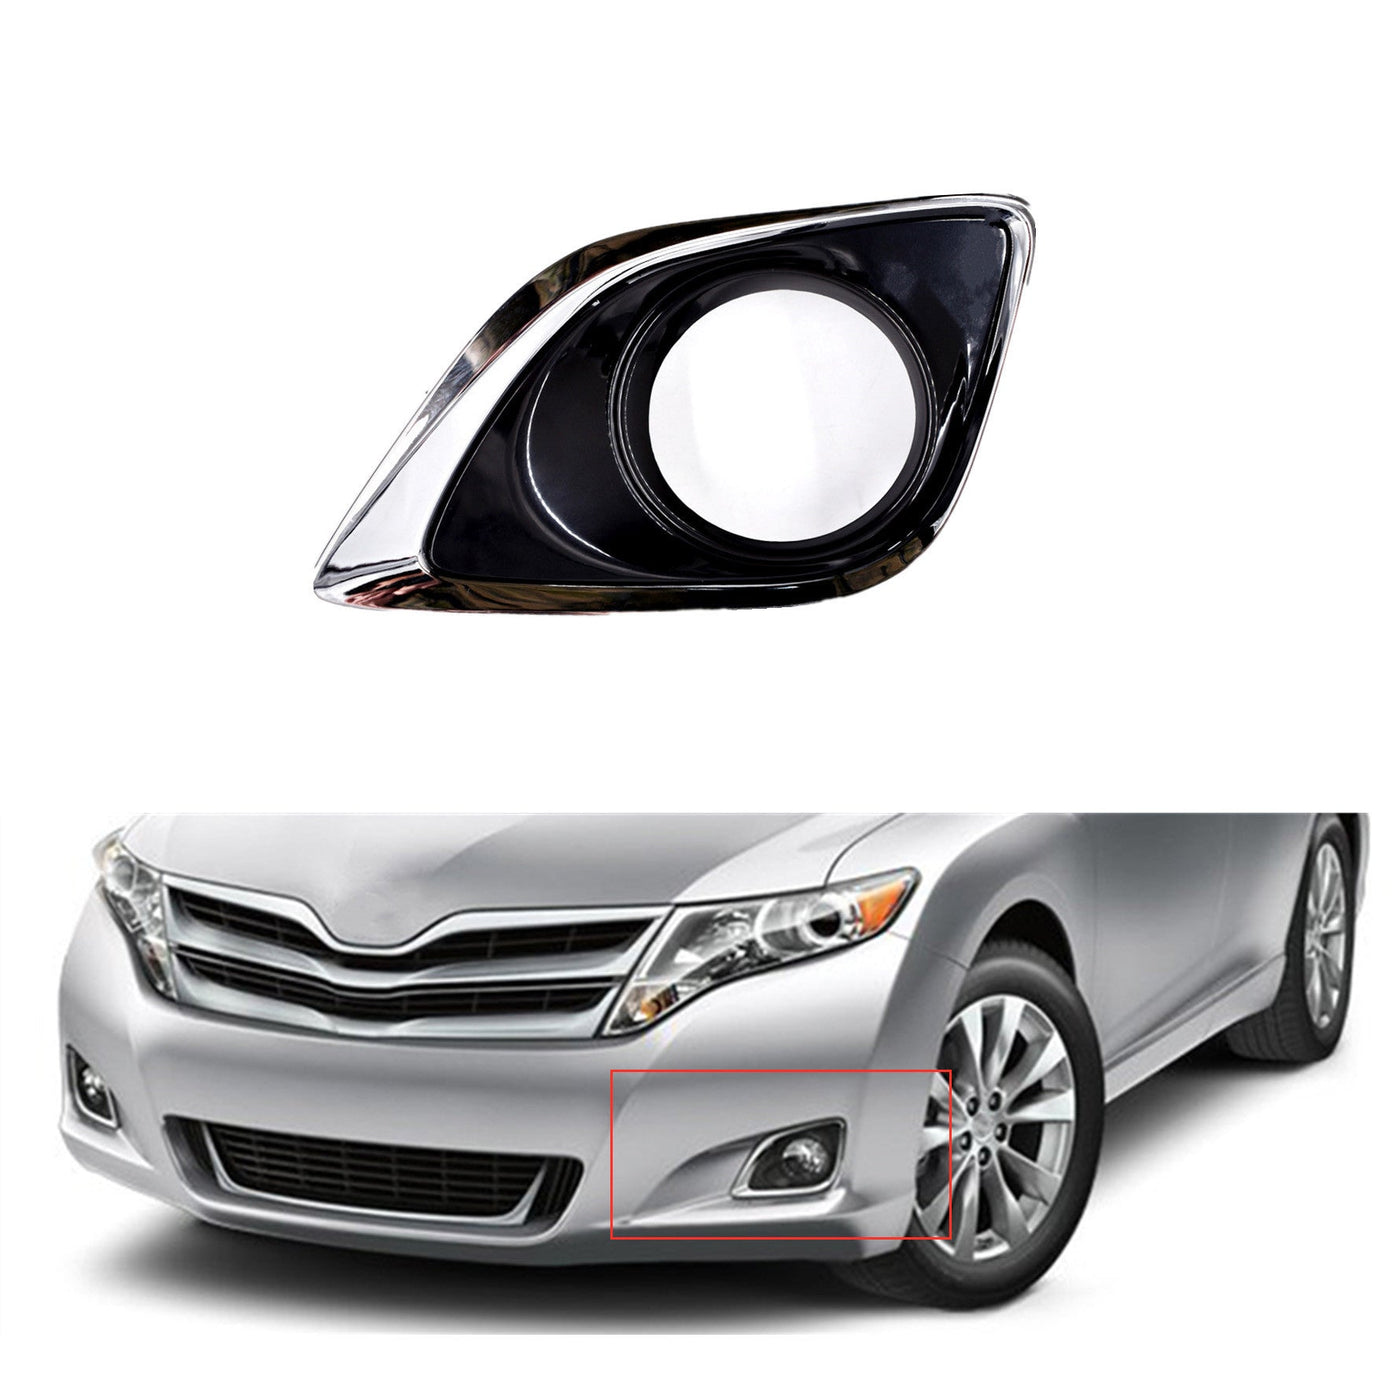 New Fog Light Trim LH Driver Side for Toyota Venza TO1038183 2013-2016 US